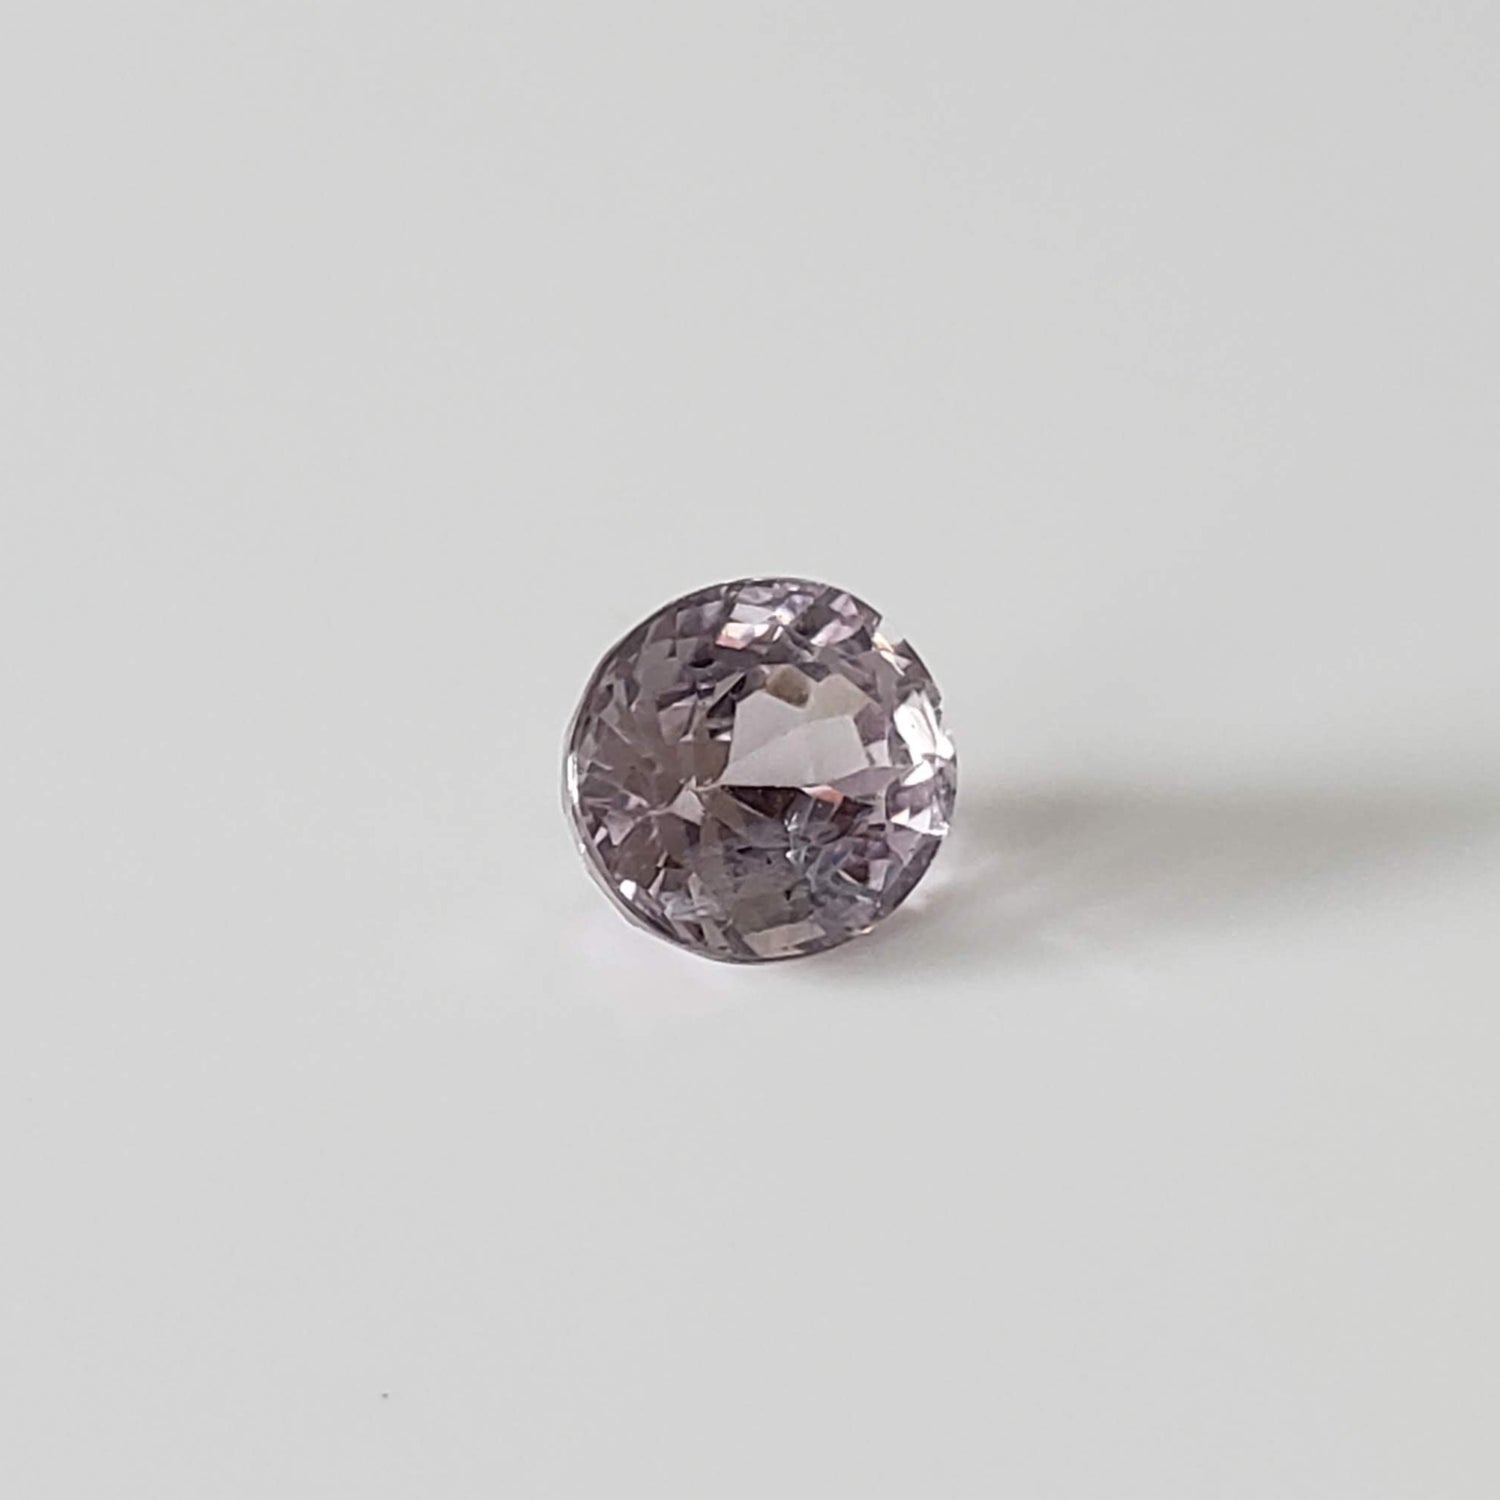 Spinel | Oval Cut | Pink | Natural | 6.8x5.8mm 1.3ct | Myanmar